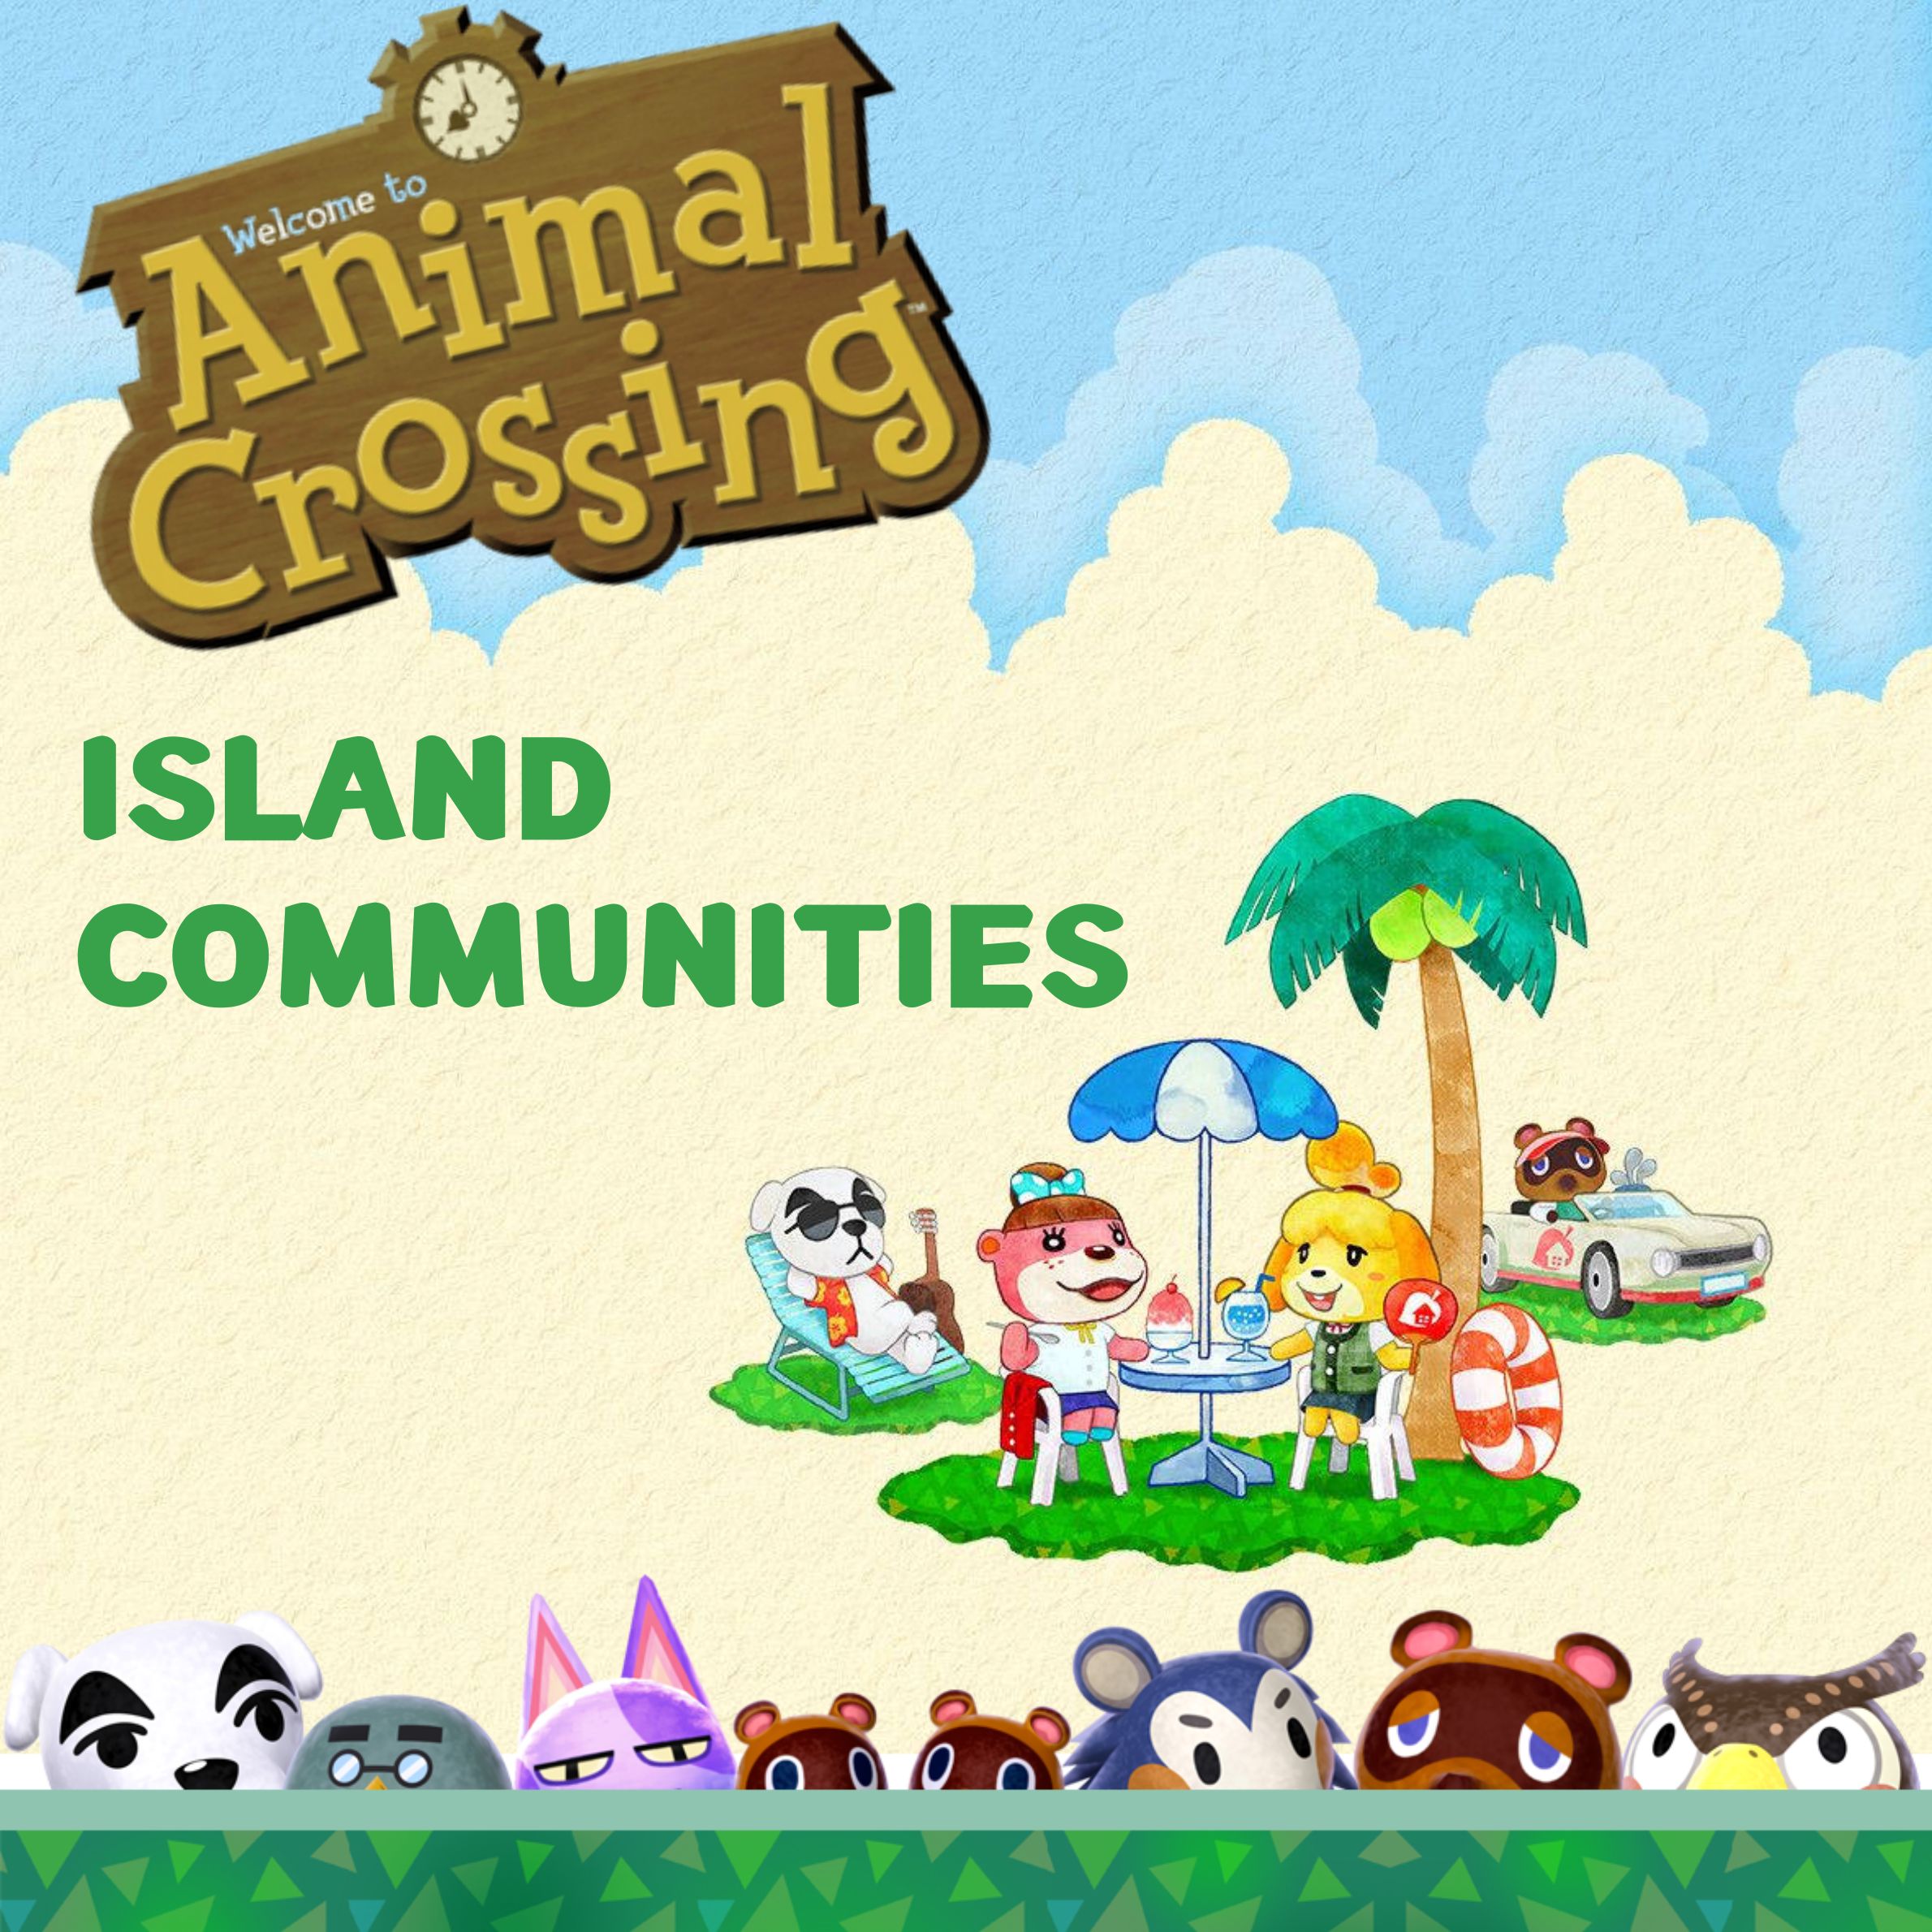 Animal grossing logo and characters